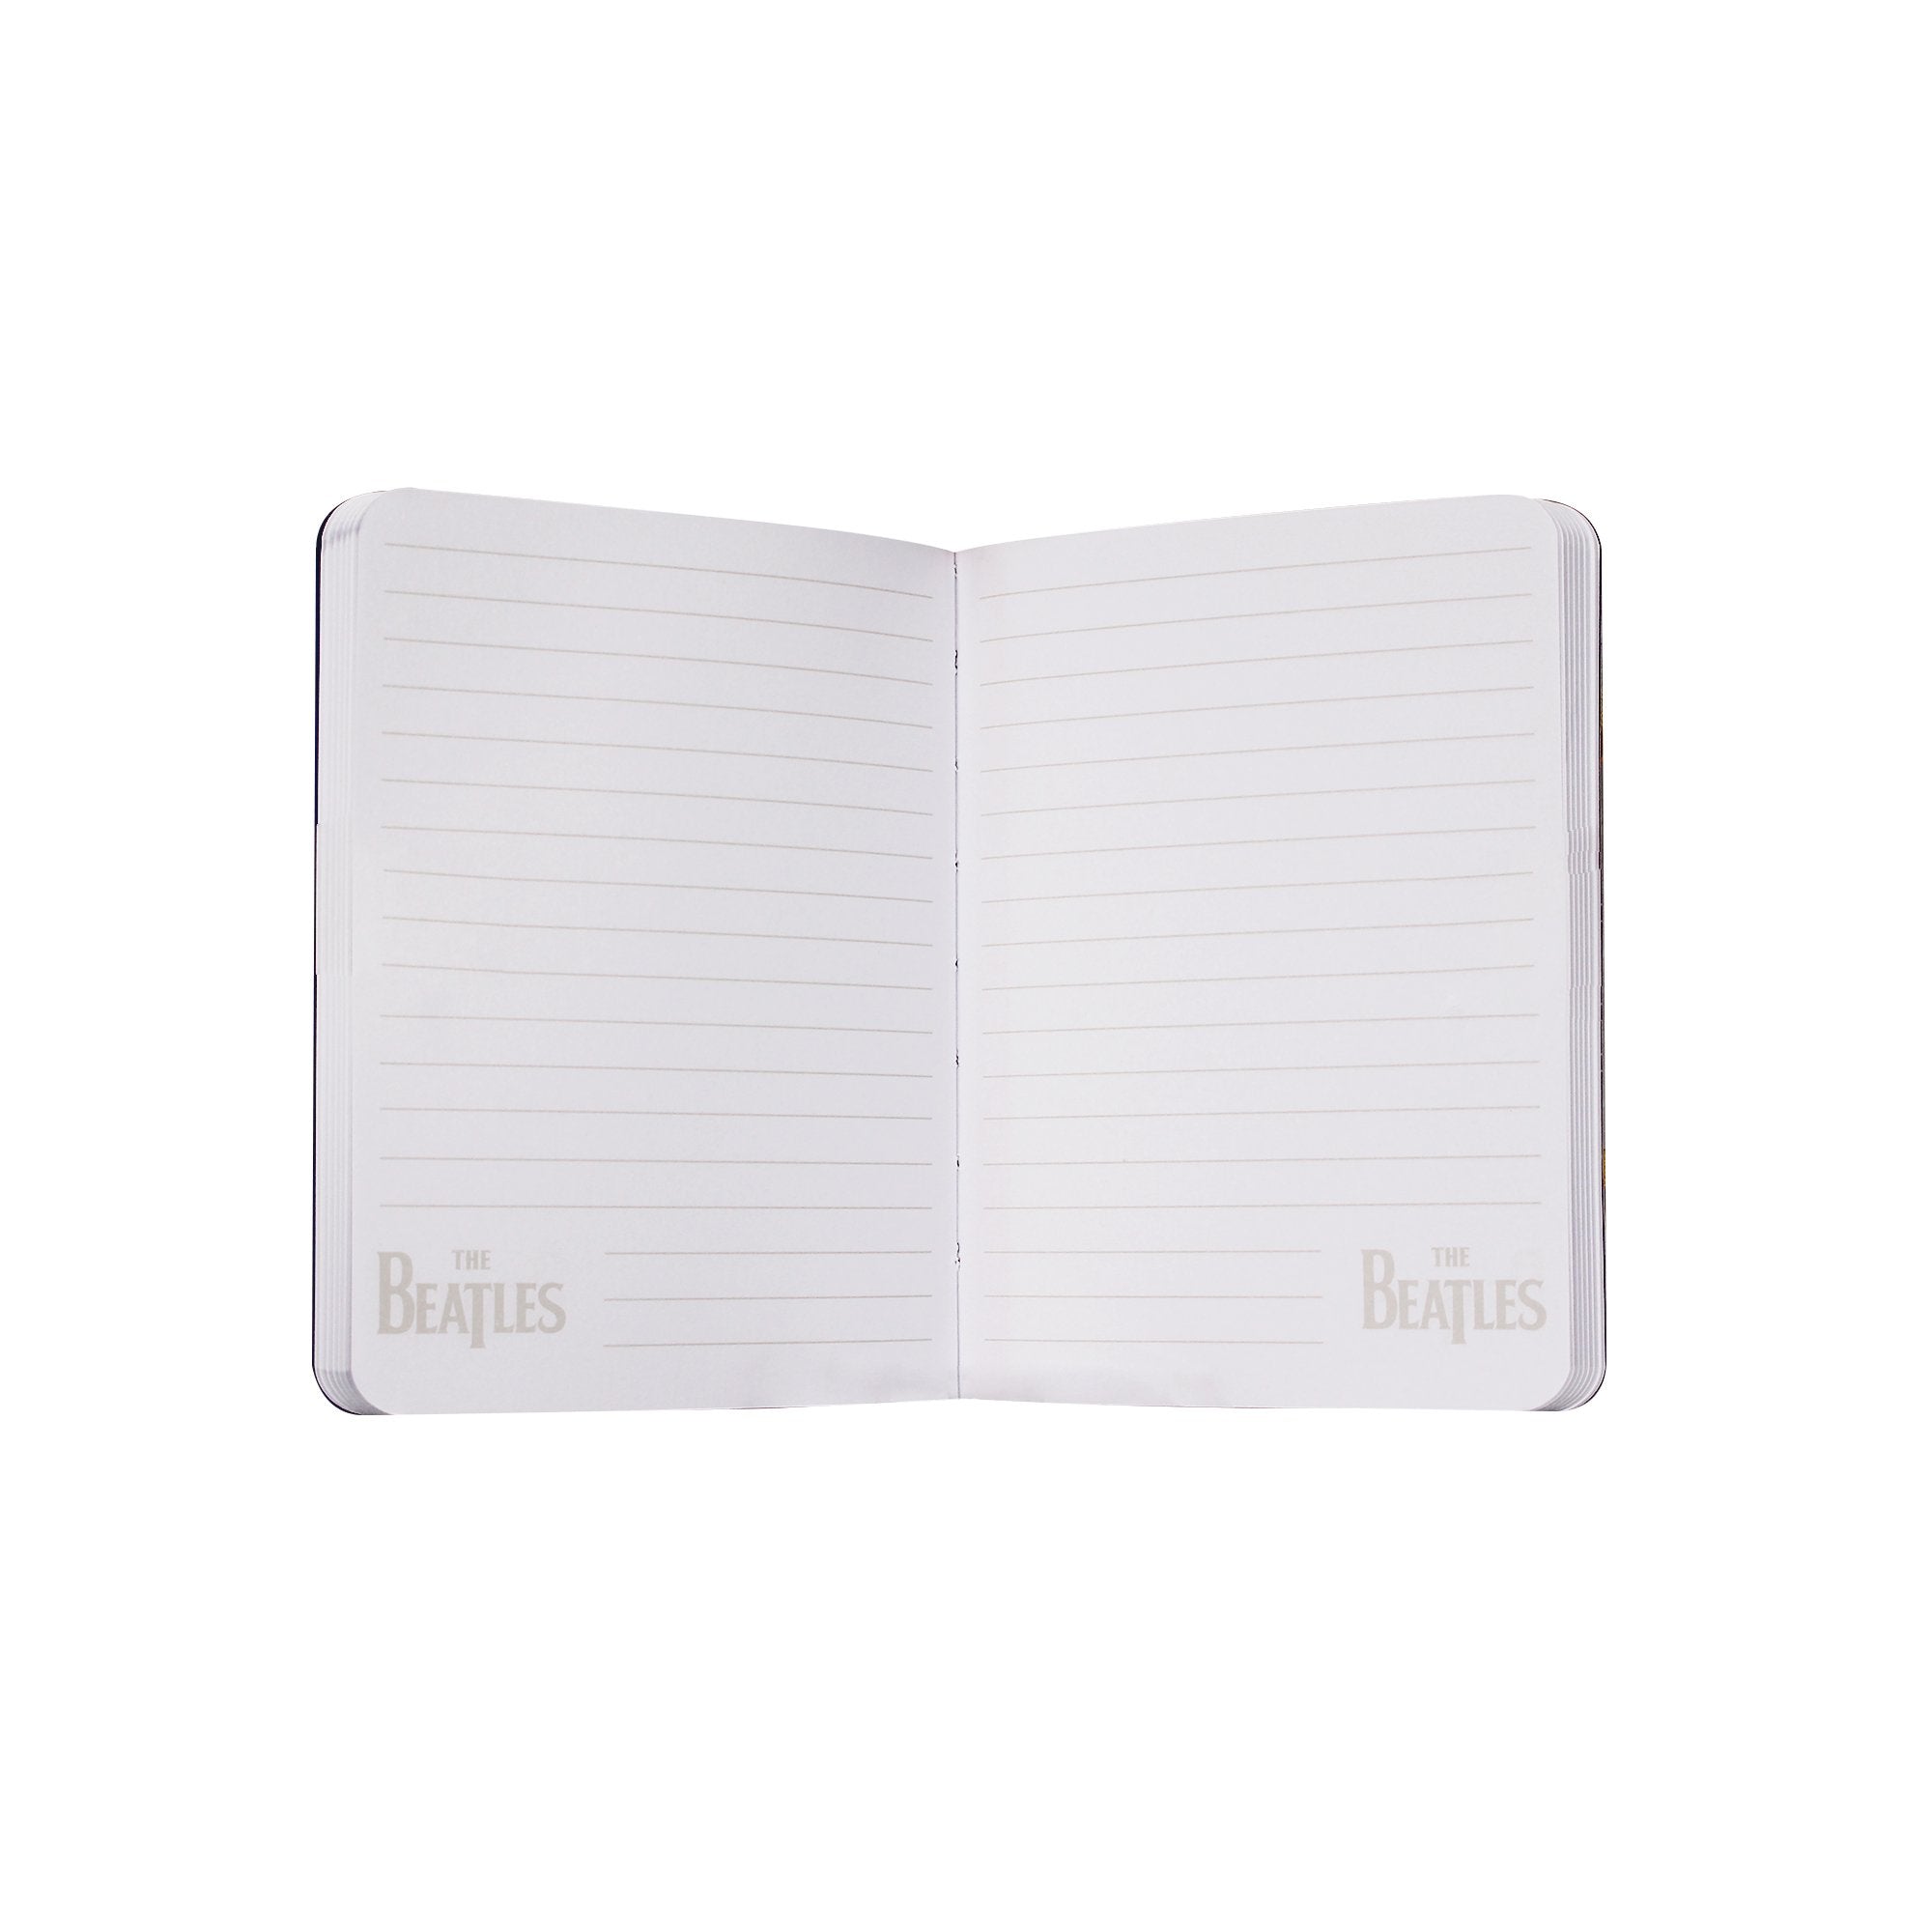 A6 Notebook (Softcover) - The Beatles (Abbey Road)